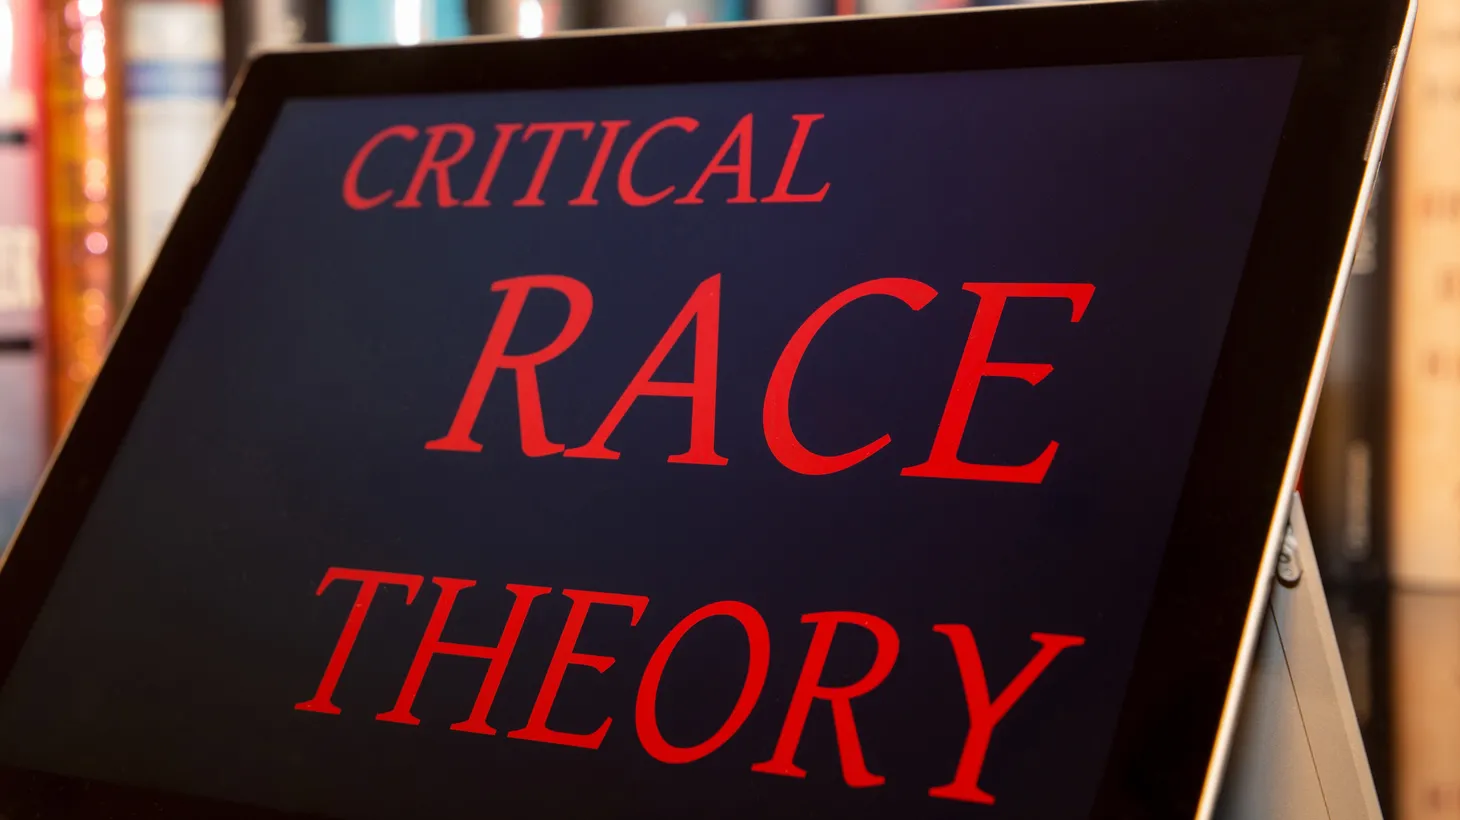 Critical race theory is a framework that examines how racism and inequality are embedded in American laws, policies, and institutions.